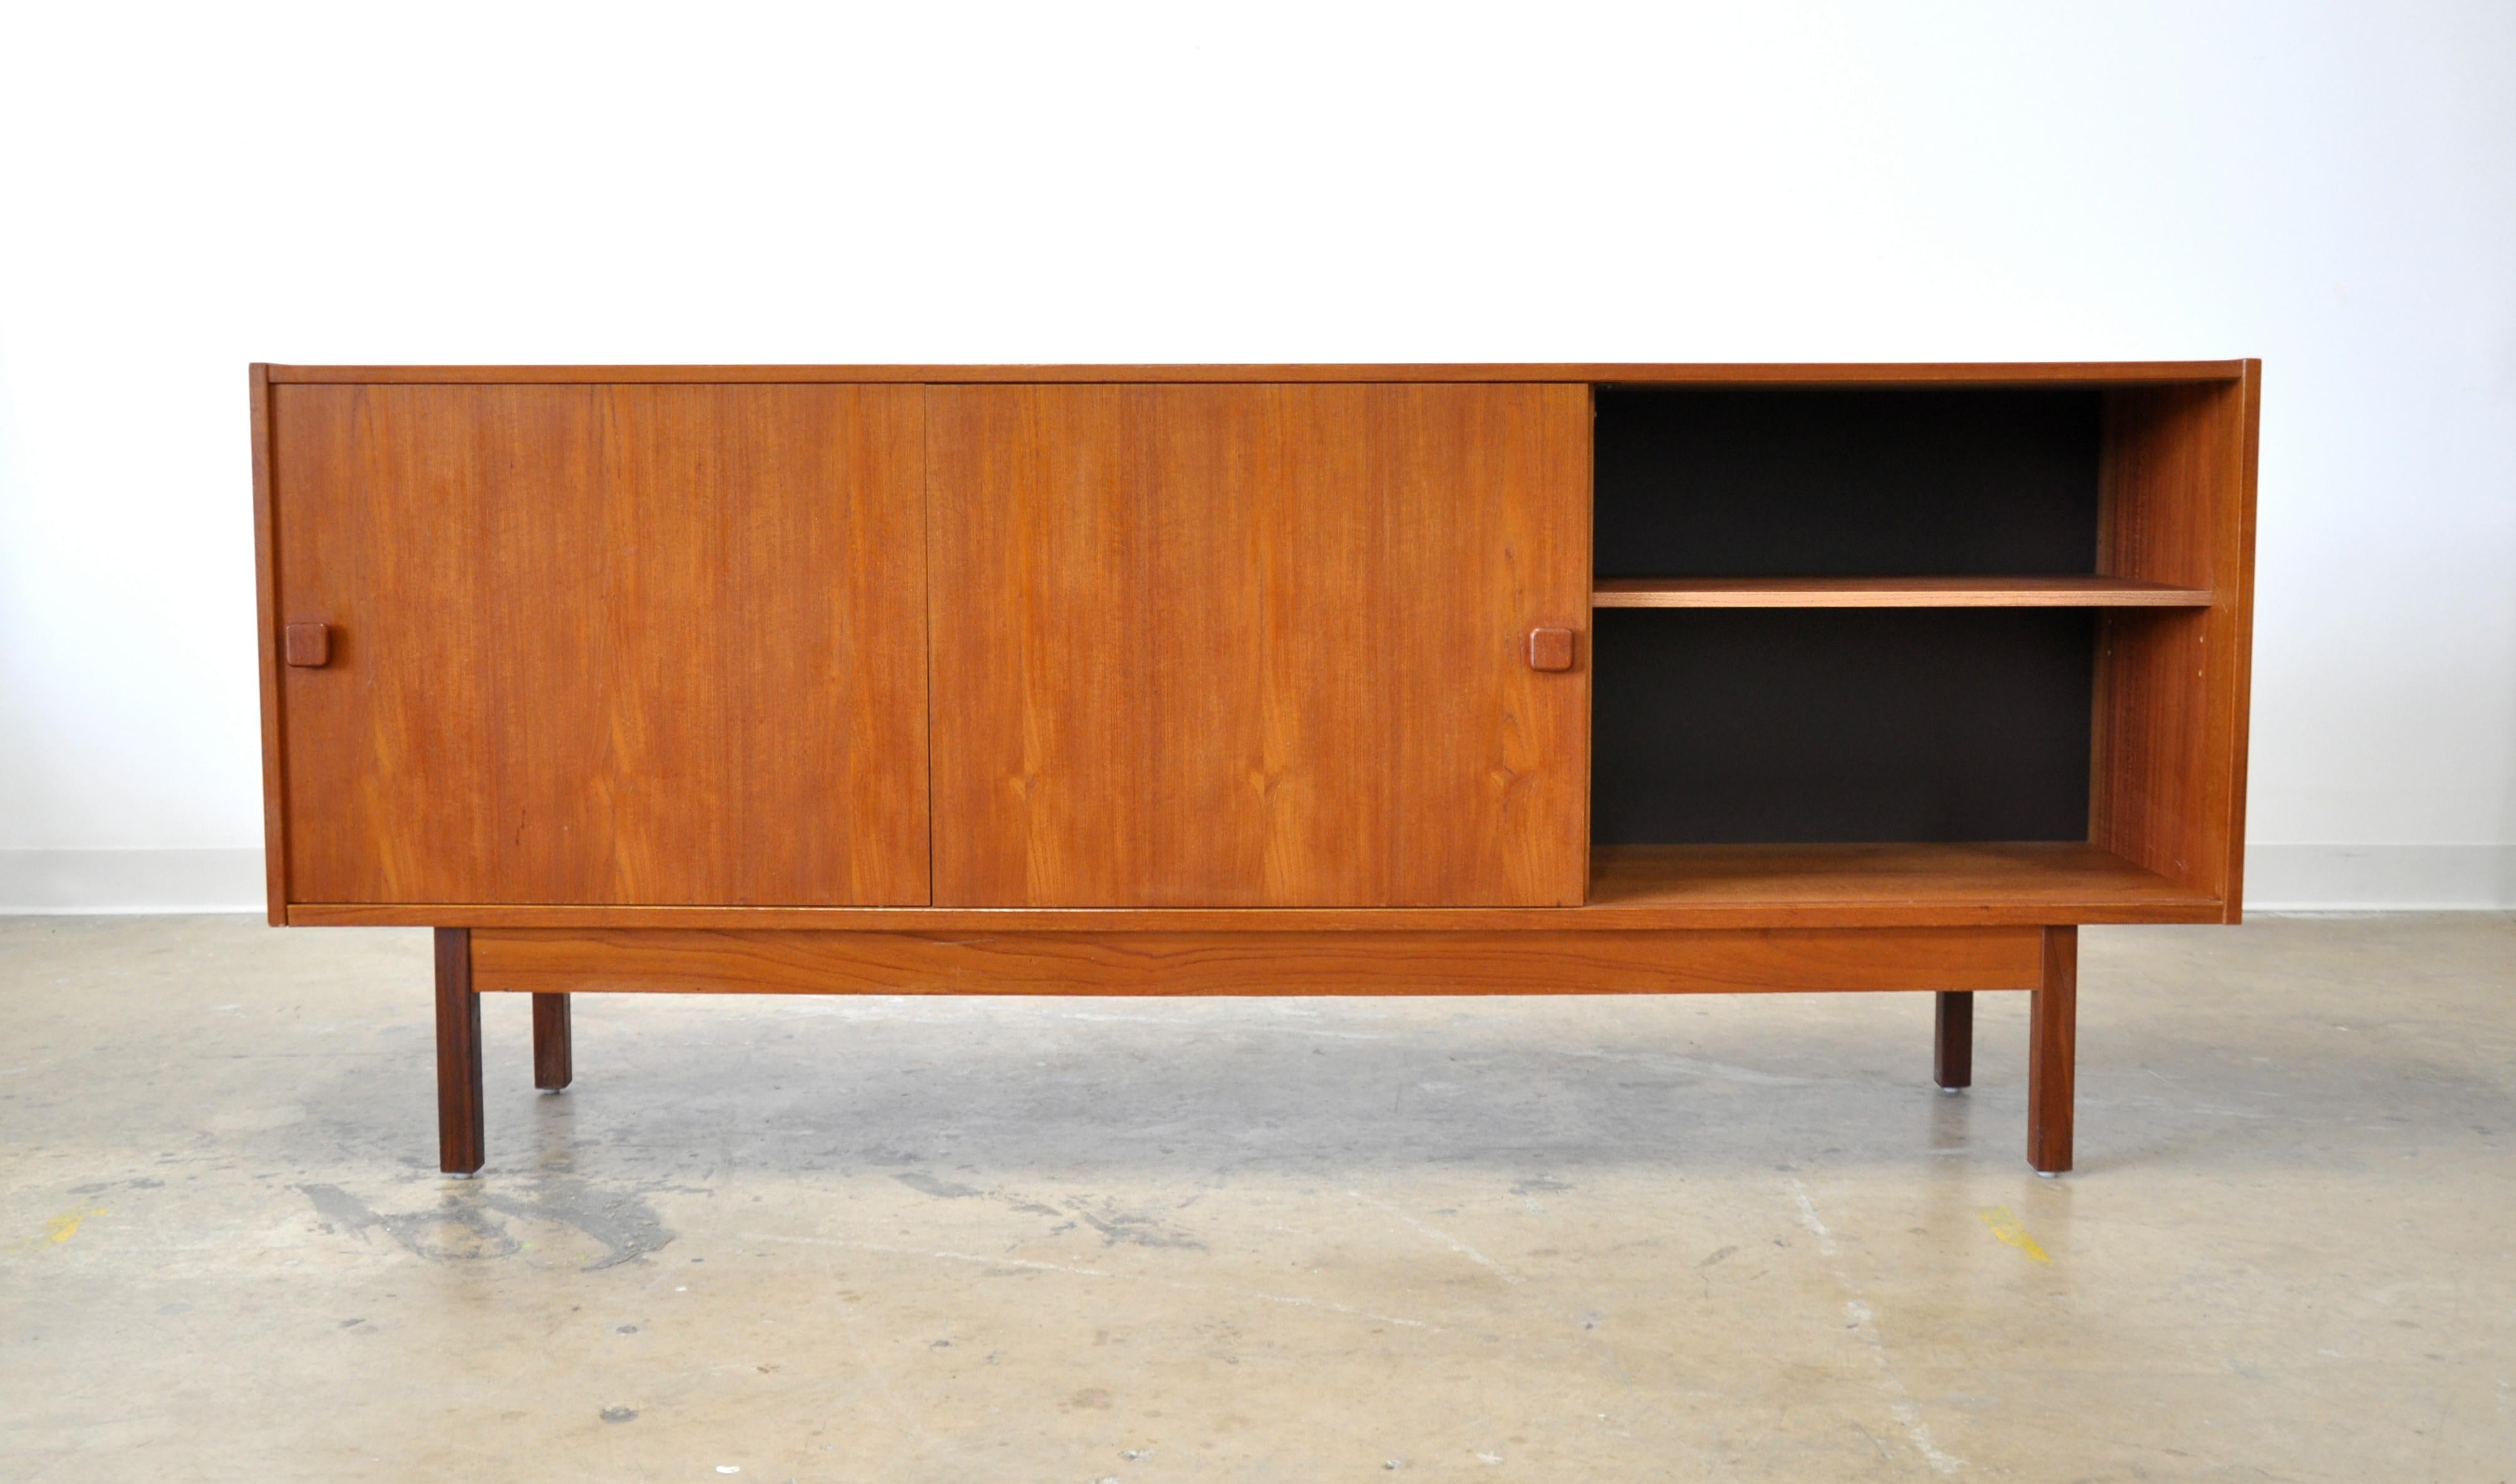 A vintage Danish Mid-Century Modern teak sideboard, made in Denmark by Domino Møbler, dating from the 1970s. The midcentury buffet features a pair of sliding cabinet doors with square sculpted handles, opening to an interior fitted with adjustable